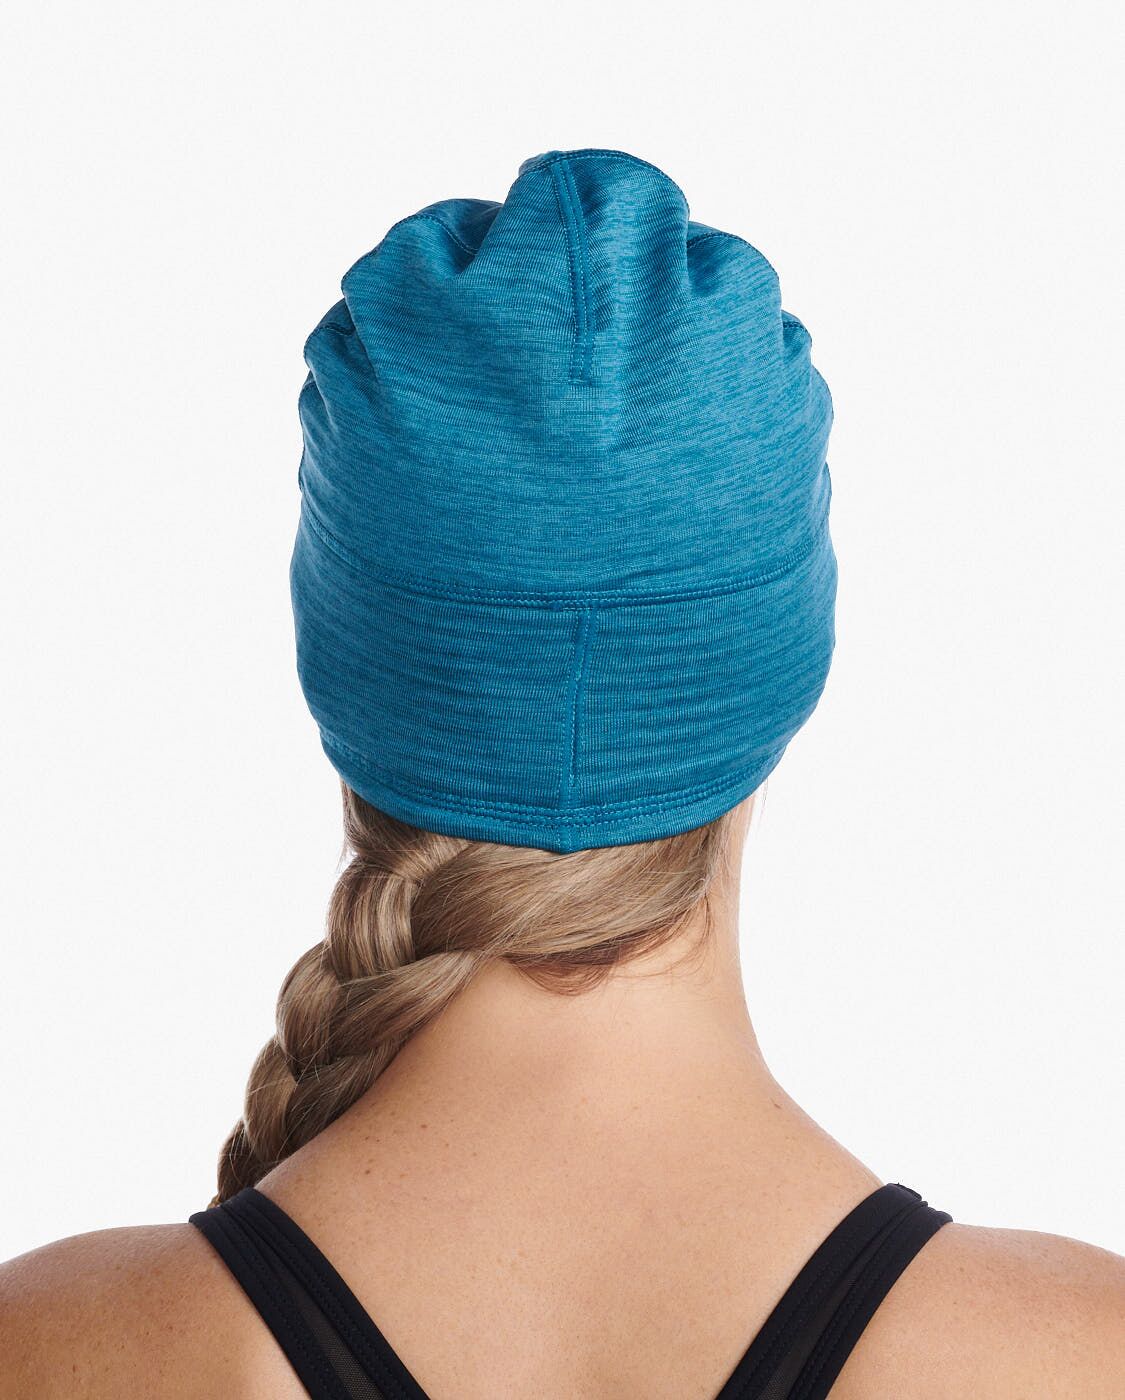 2XU South Africa - Ignition Beanie - Oceanside/Silver Reflective